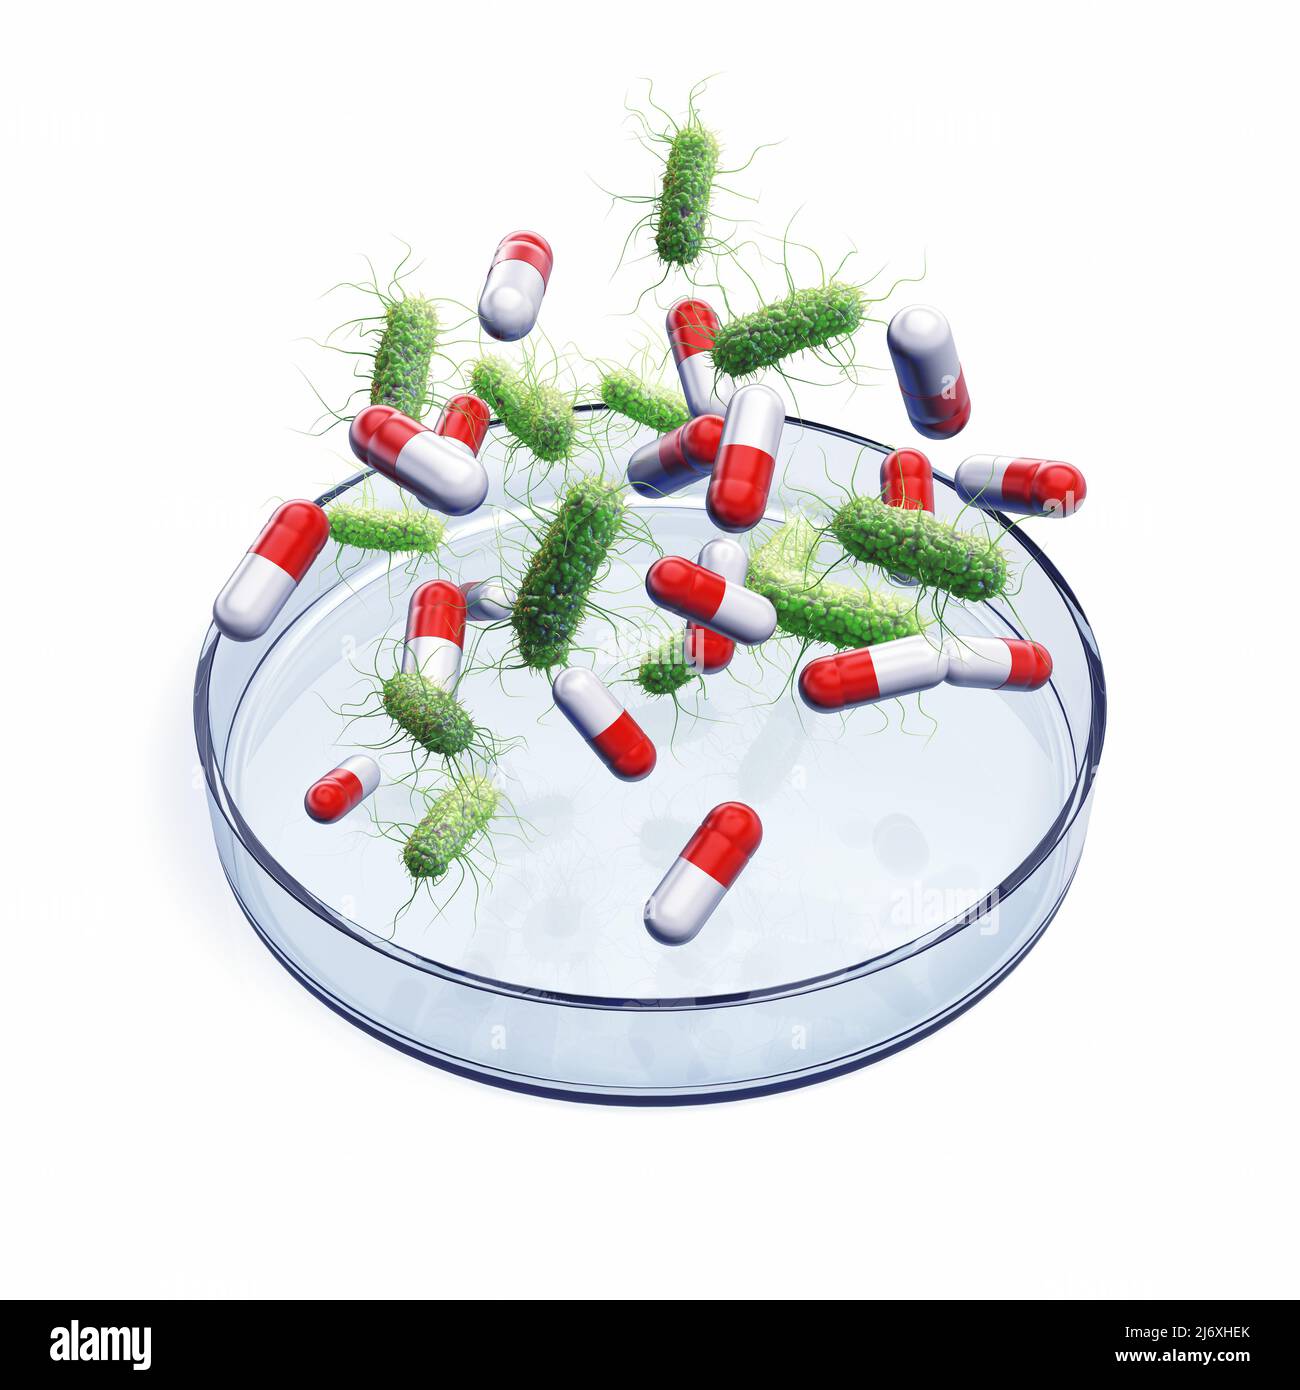 Antimicrobial Resistance (AMR) occurs when bacteria no longer responds to medicines. Bacteria and capsules over petri dish isolated on white Stock Photo